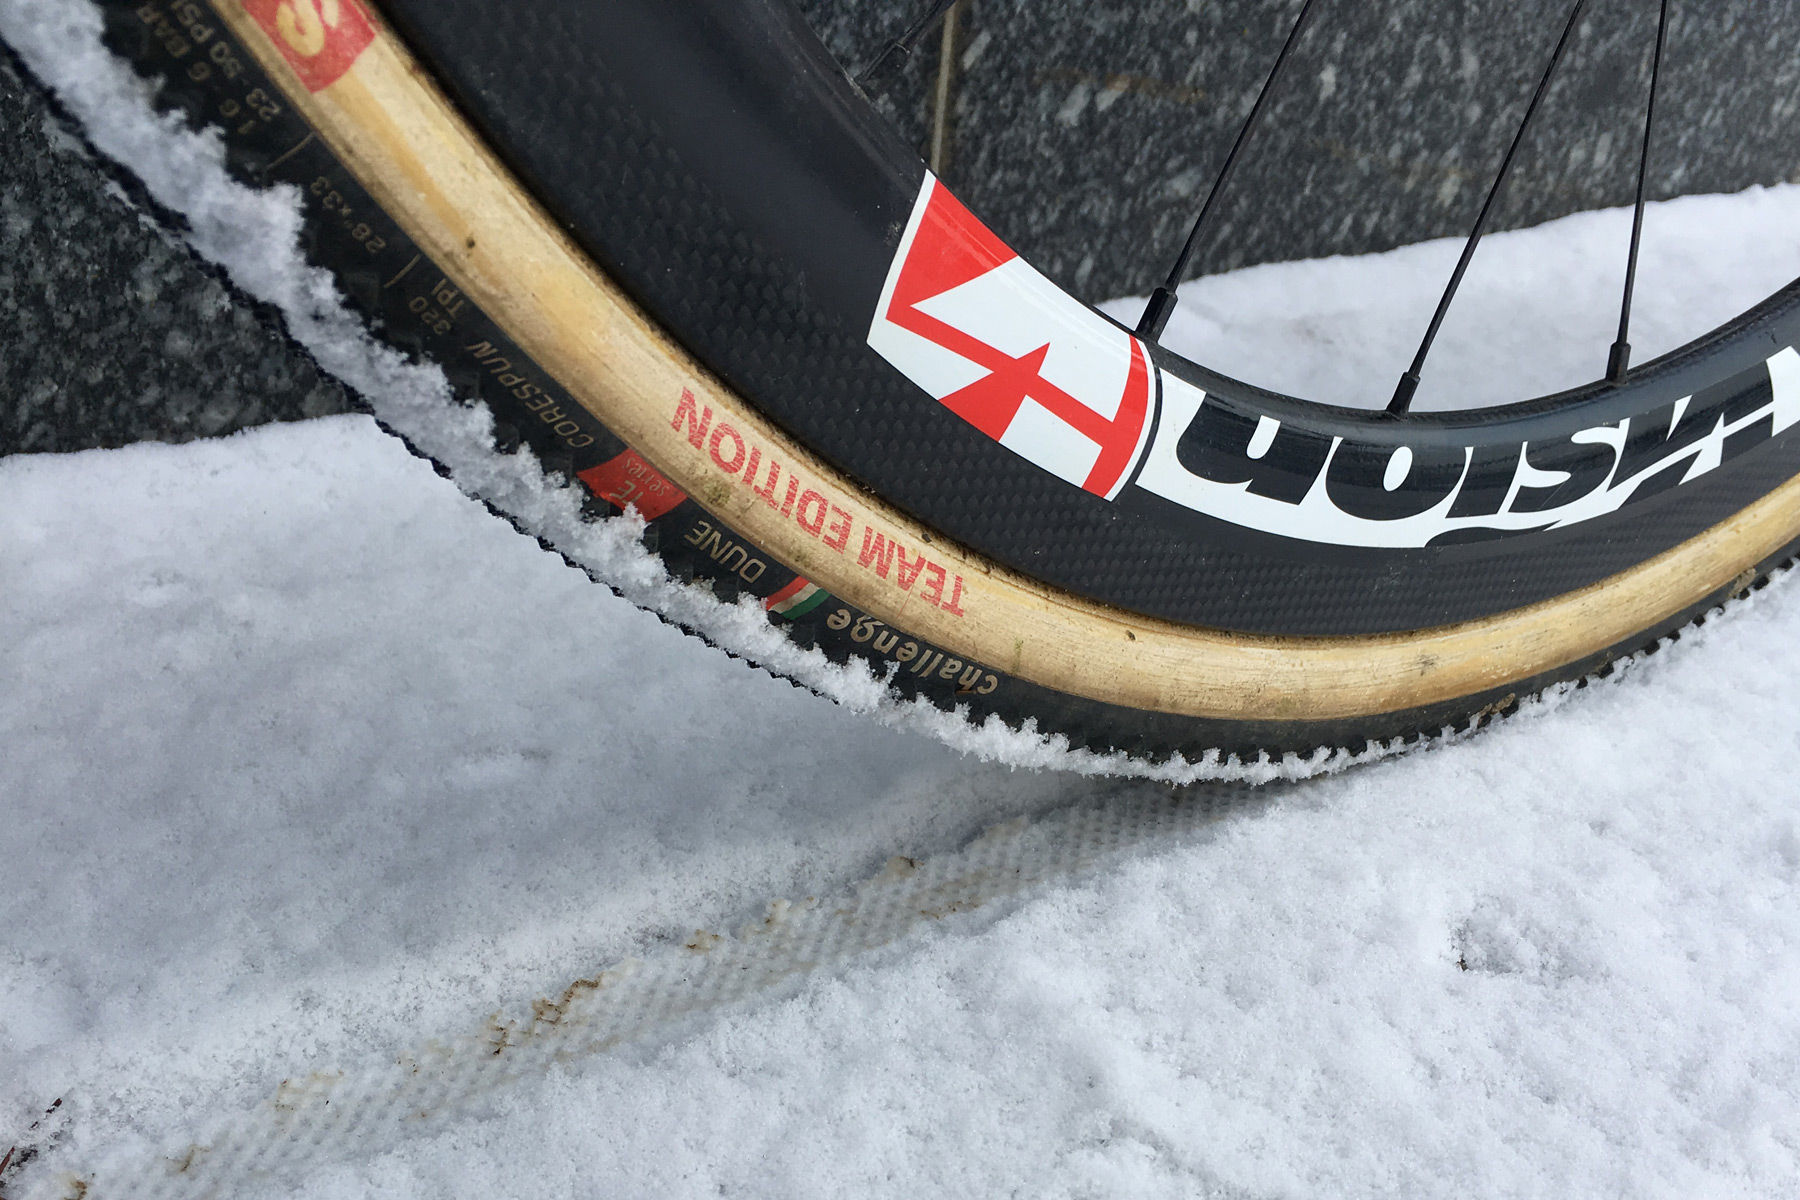 The Wyman Method of setting proper cyclocross race tire pressure – Part 1